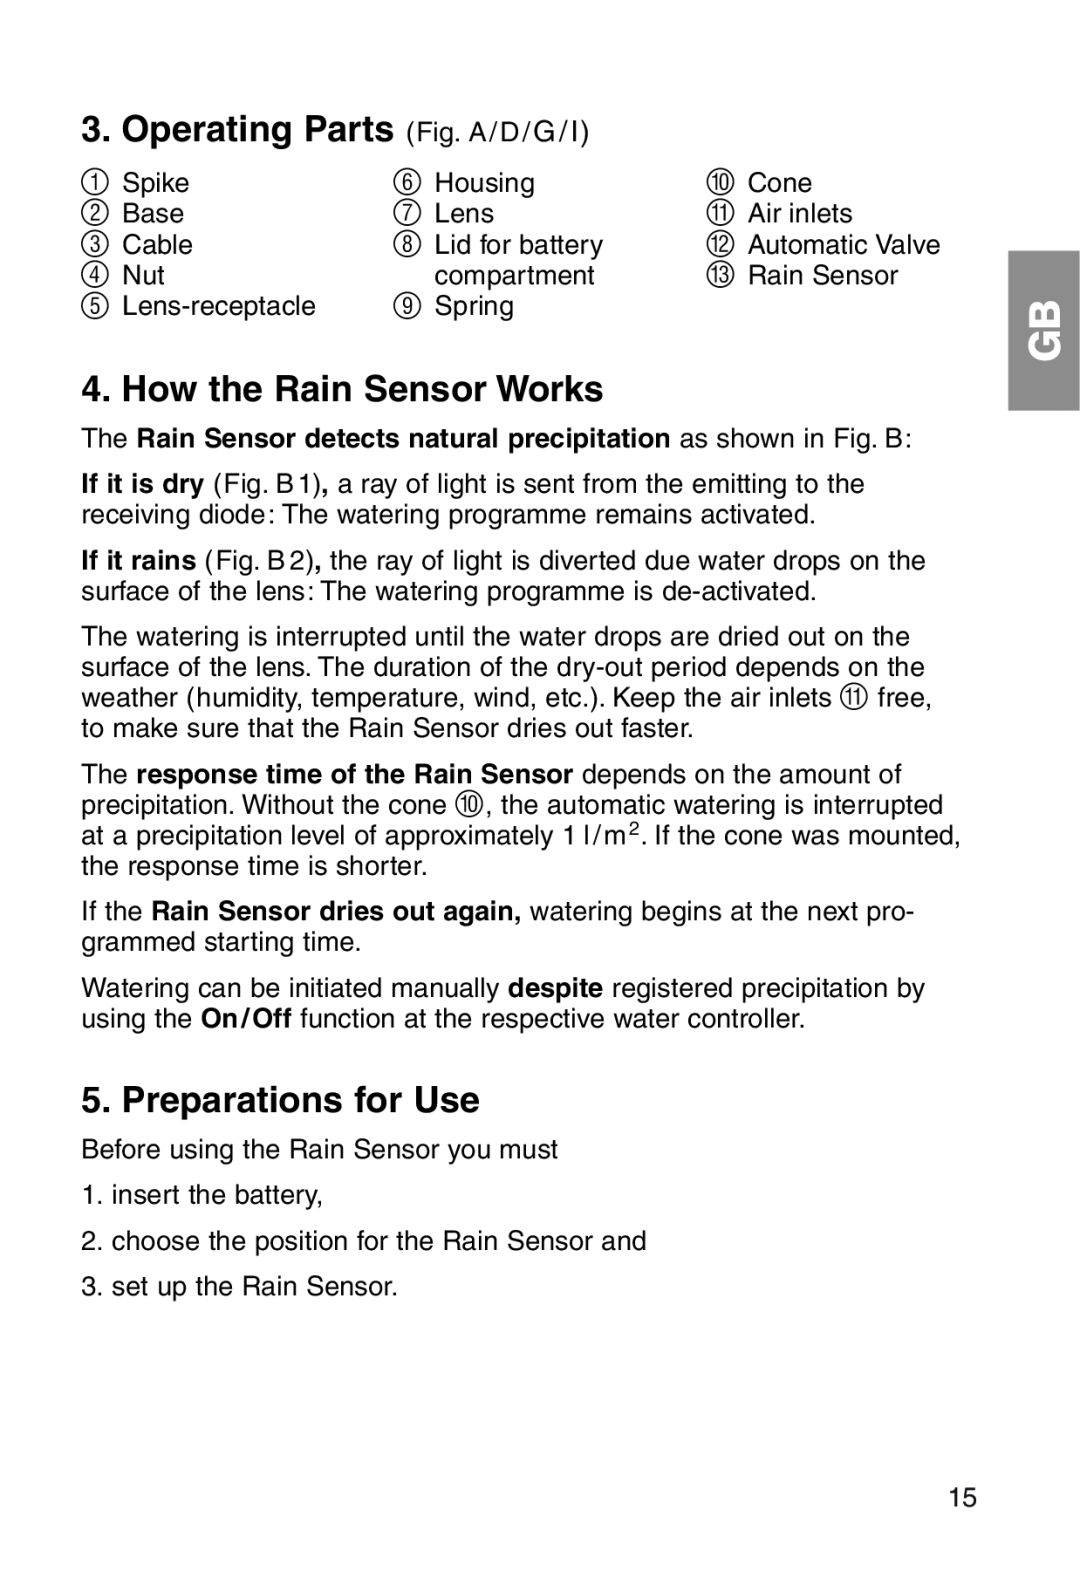 Gardena ART.1189 manual Operating Parts Fig. A / D / G, How the Rain Sensor Works, Preparations for Use 